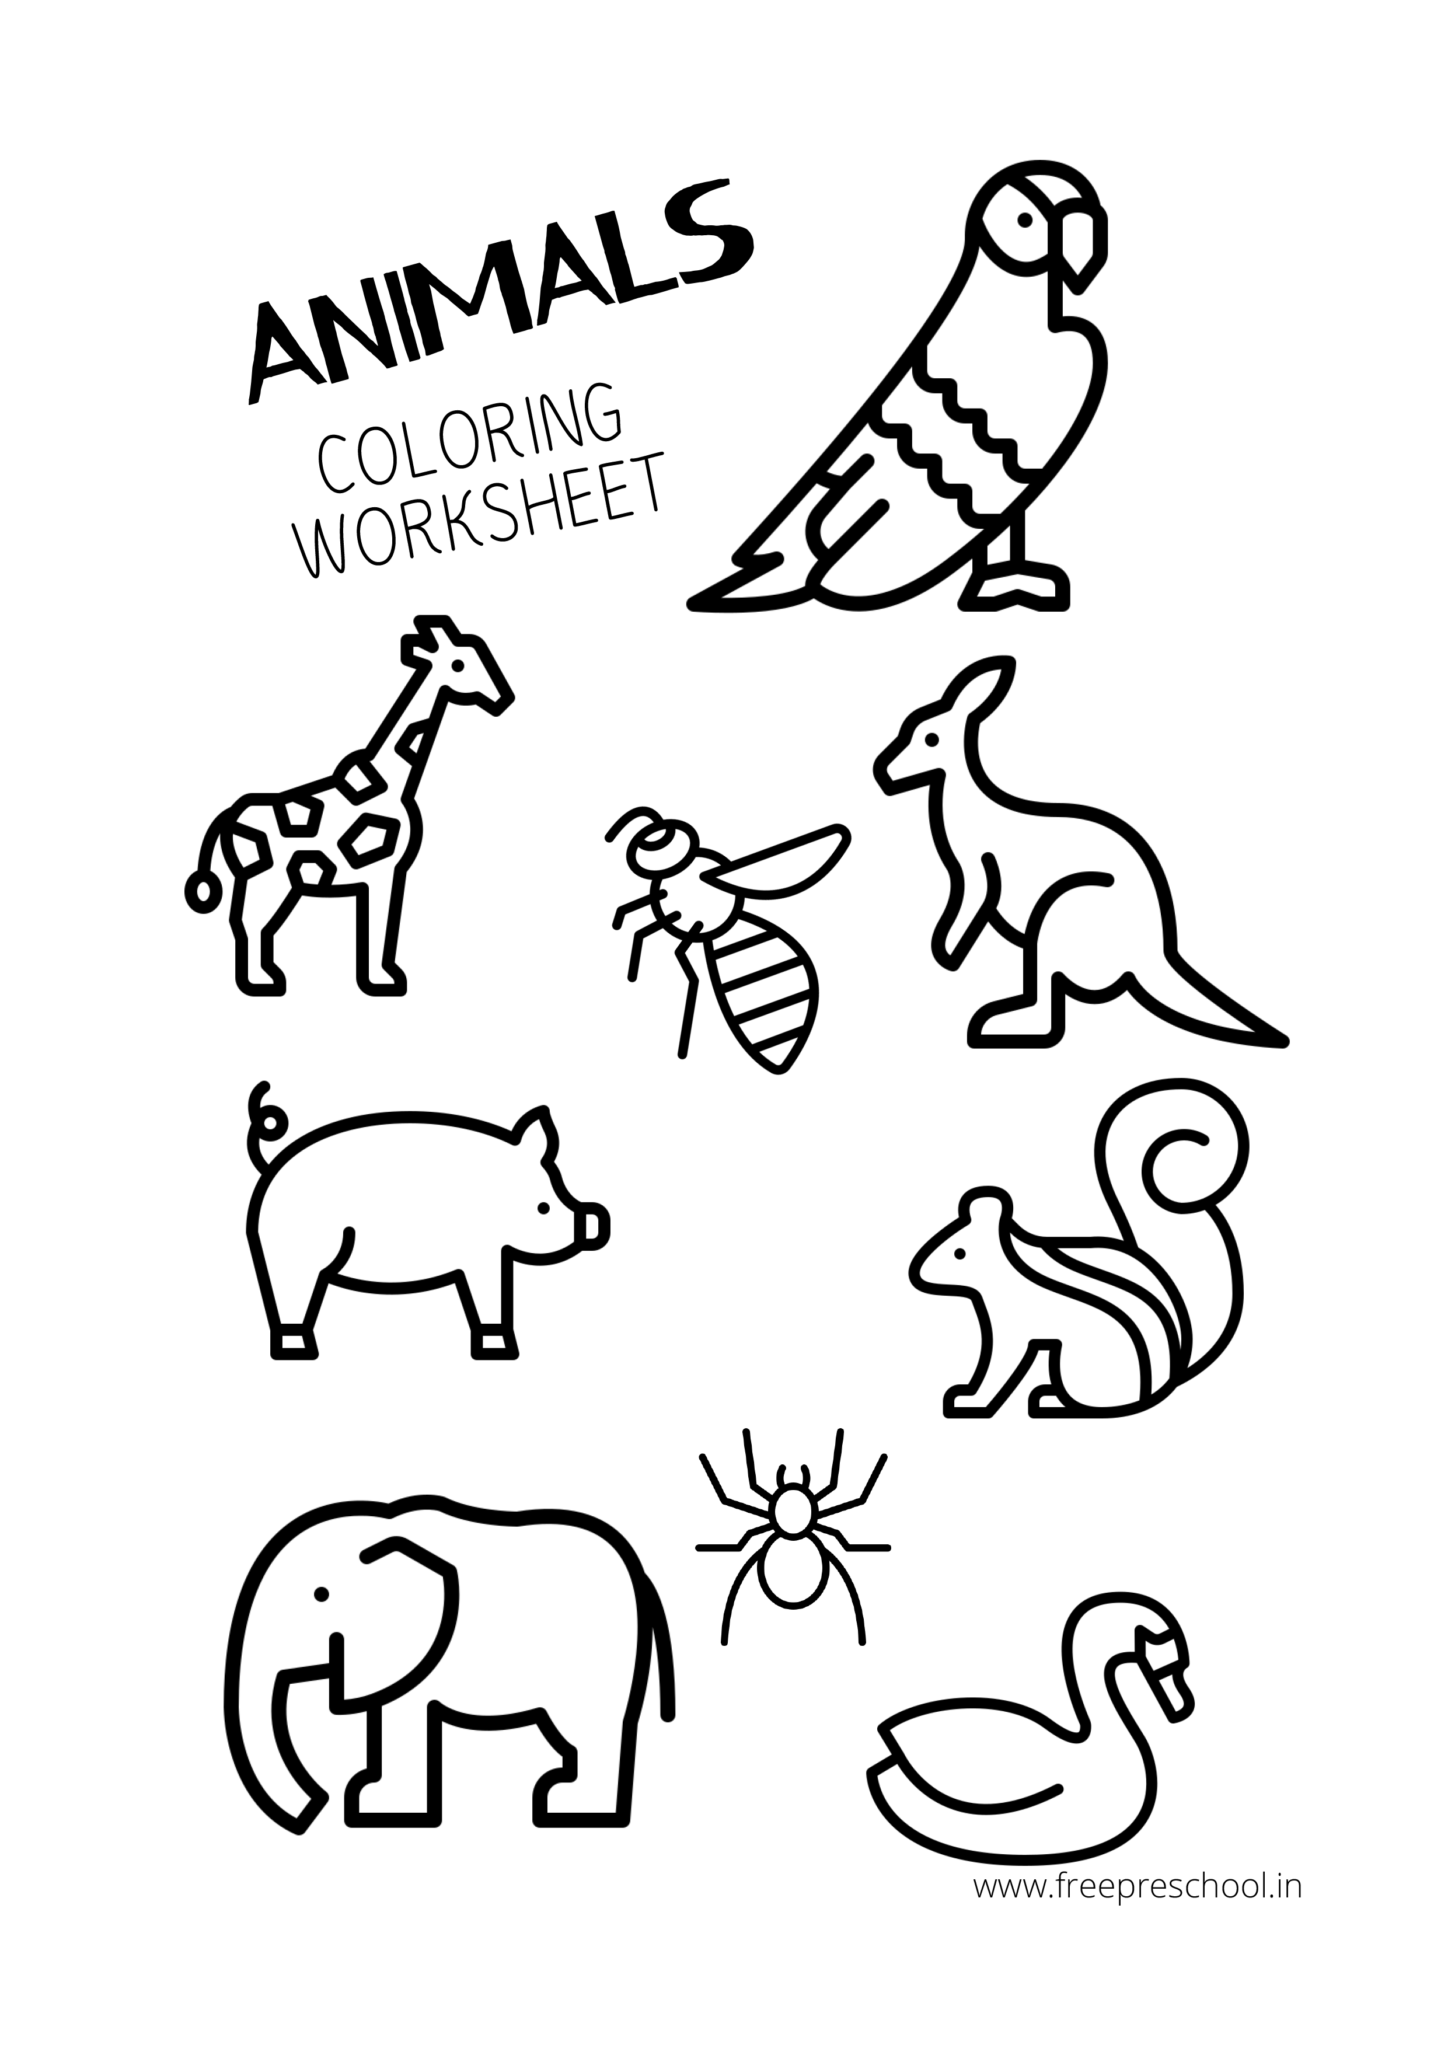 animal-coloring-pages-free-downloads-free-preschool